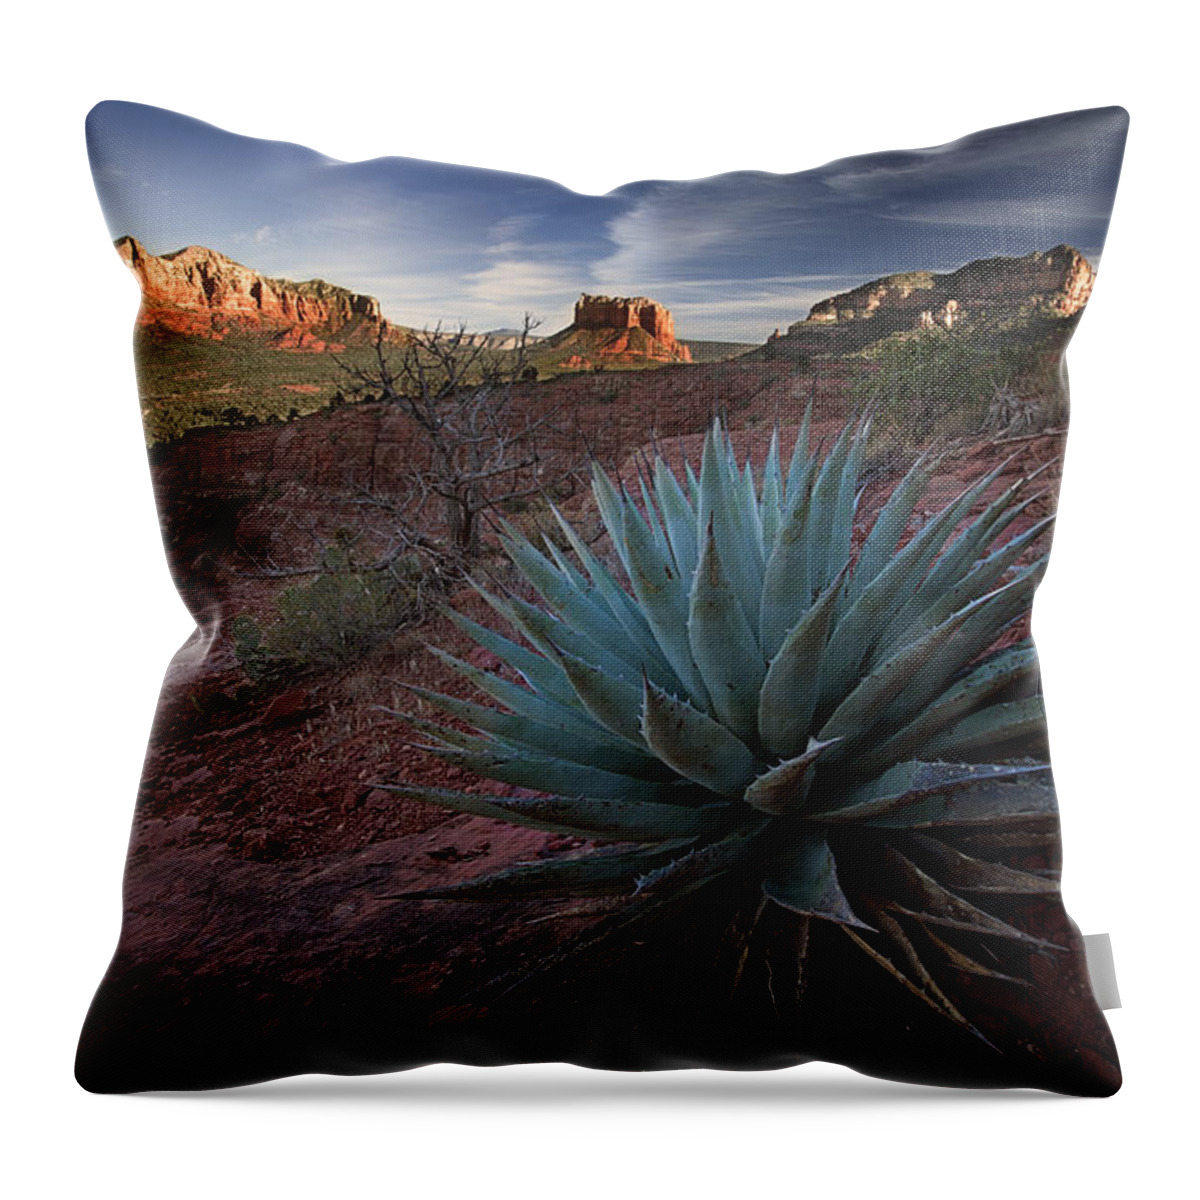 Landscape Throw Pillow featuring the photograph Agave in the mountains by Dominique Dubied